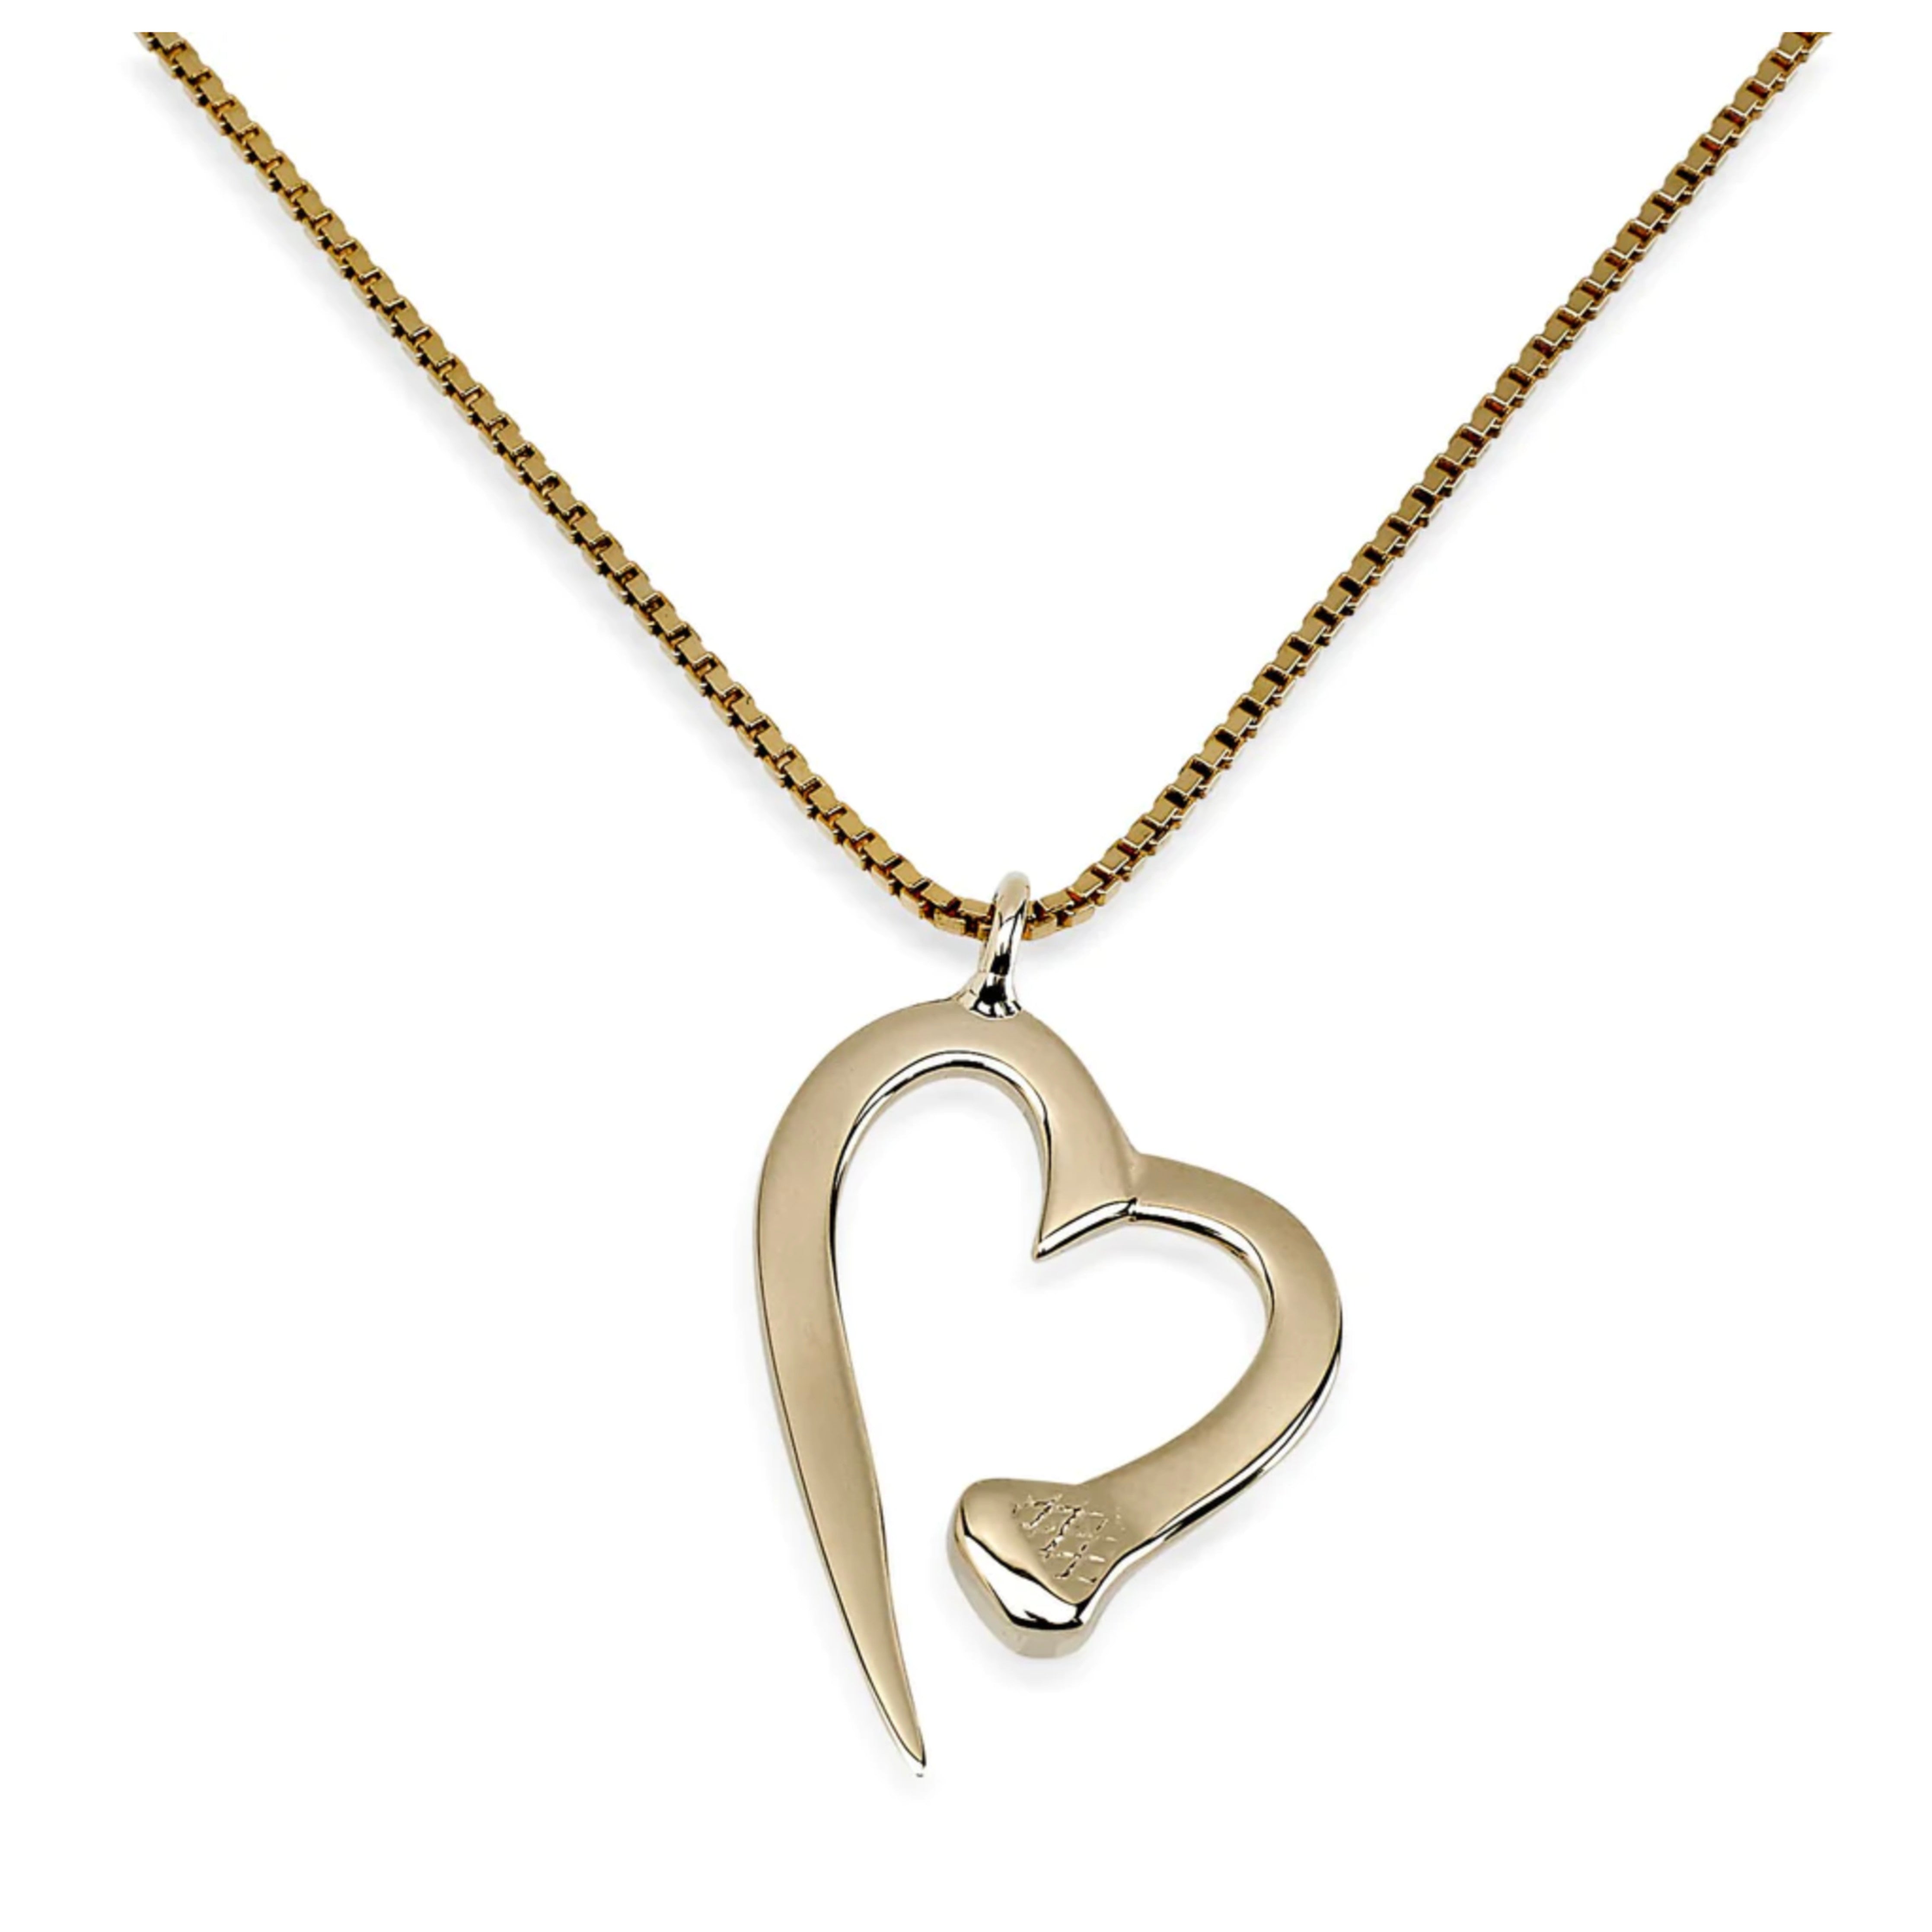 Rusty Brown Nail Heart Necklace 14k Gold